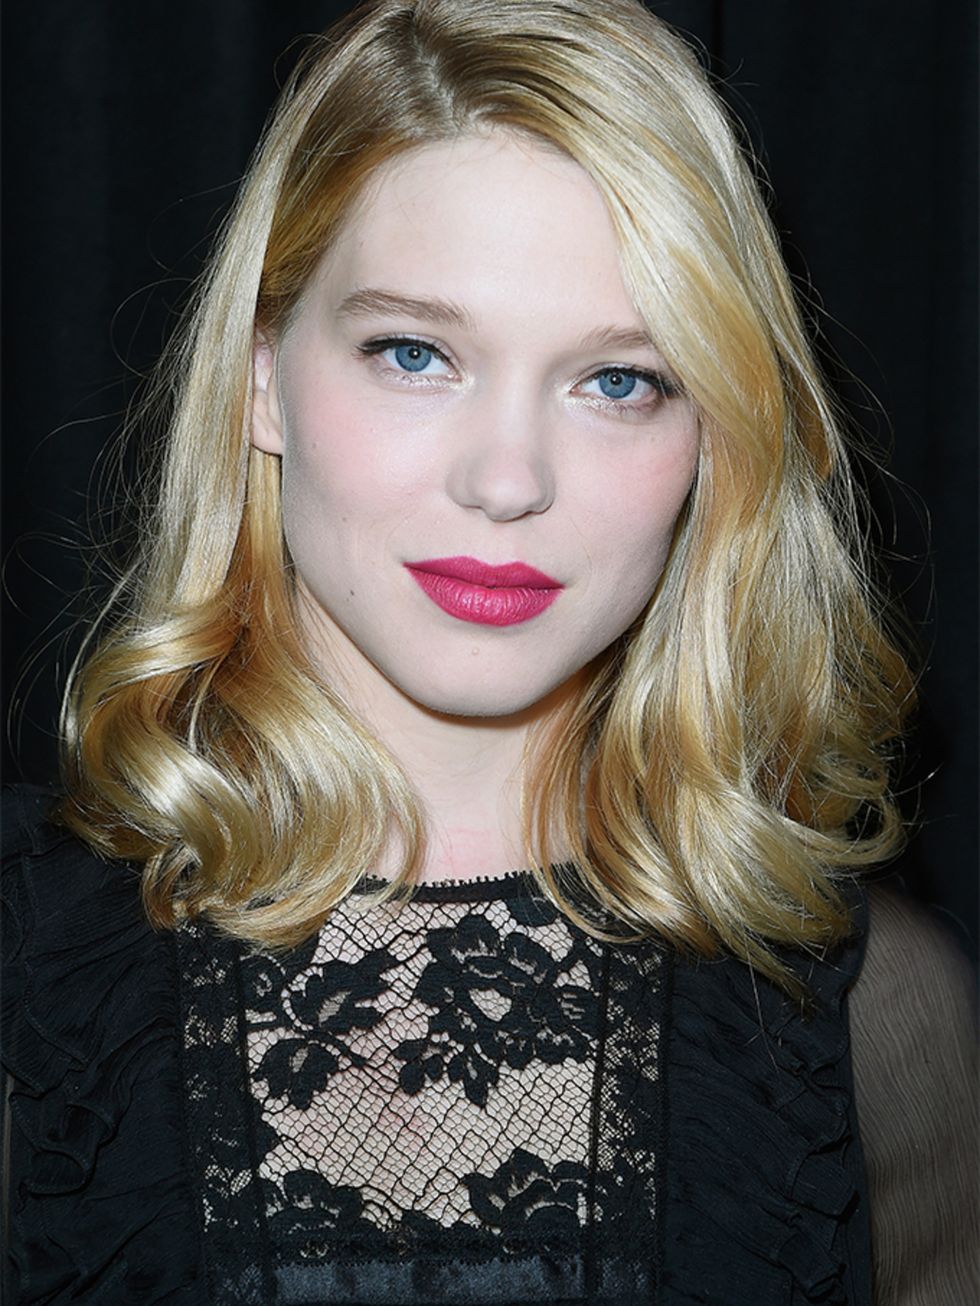 <p><strong>Old school glamour</strong></p>

<p>When Léa Seydoux was confirmed to play the Bond girl in No.24 we developed even more of a crush on her.</p>

<p>There are many an attribute that maketh a good Bond girl: glamour, sass, wit and, not least, dam